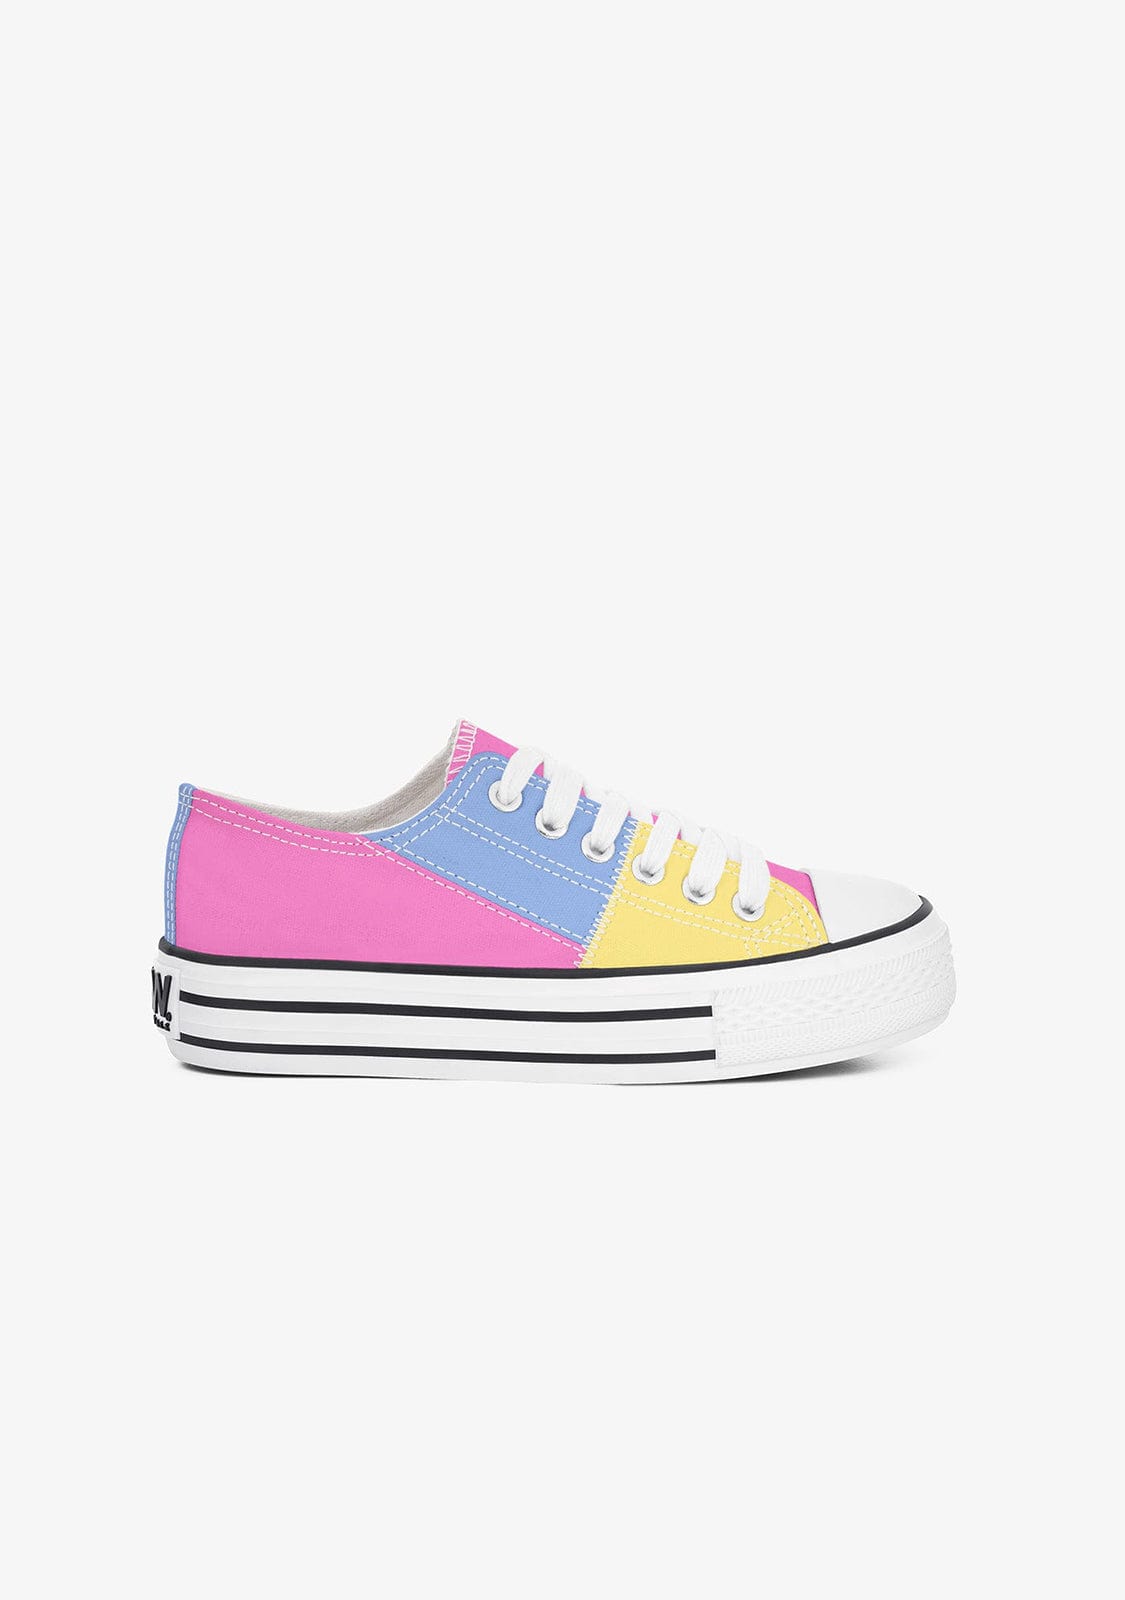 FRESAS CON NATA Shoes Girl's Multi Color Changing Sneakers